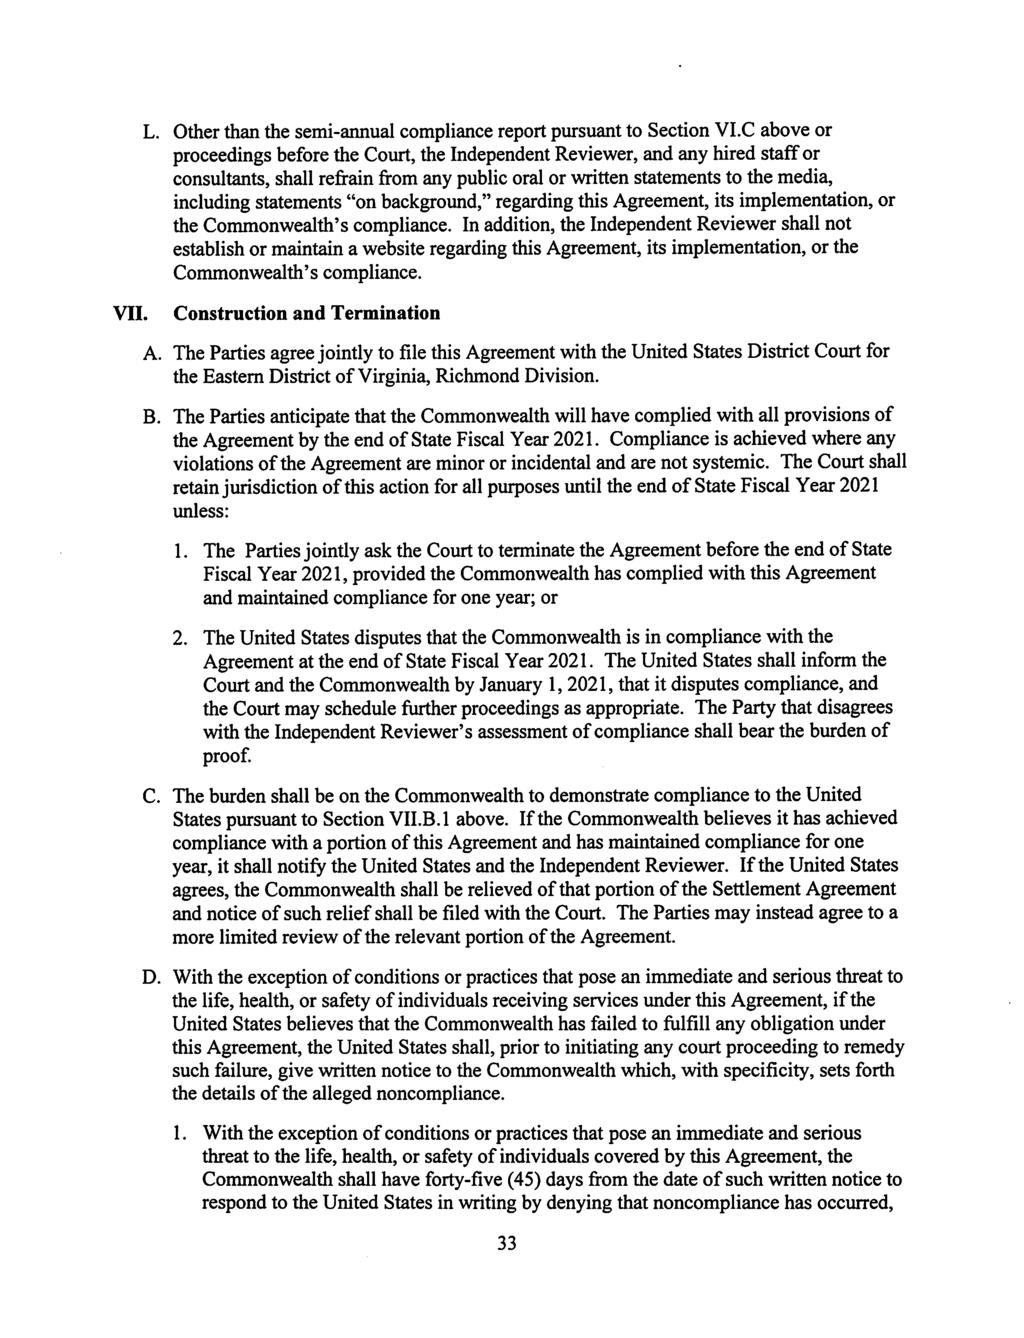 Case 3:12-cv-00059-JAG Document 112 Filed 08/23/12 Page 46 of 53 PageID# 4684 L. Other than the semi-annual compliancereport pursuant to Section VI.